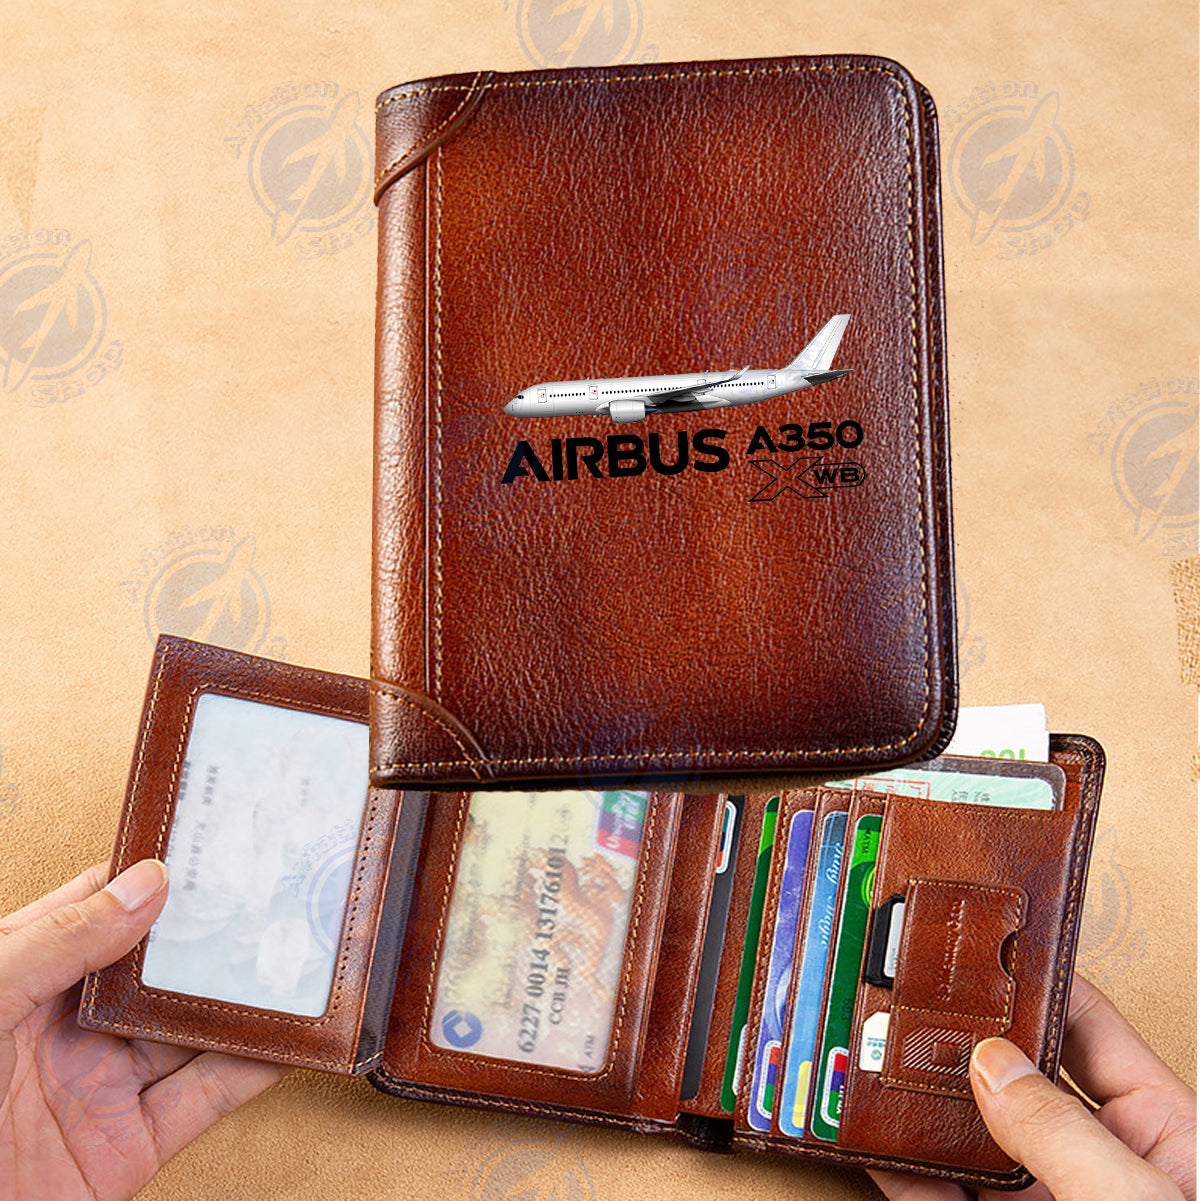 The Airbus A350 WXB Designed Leather Wallets